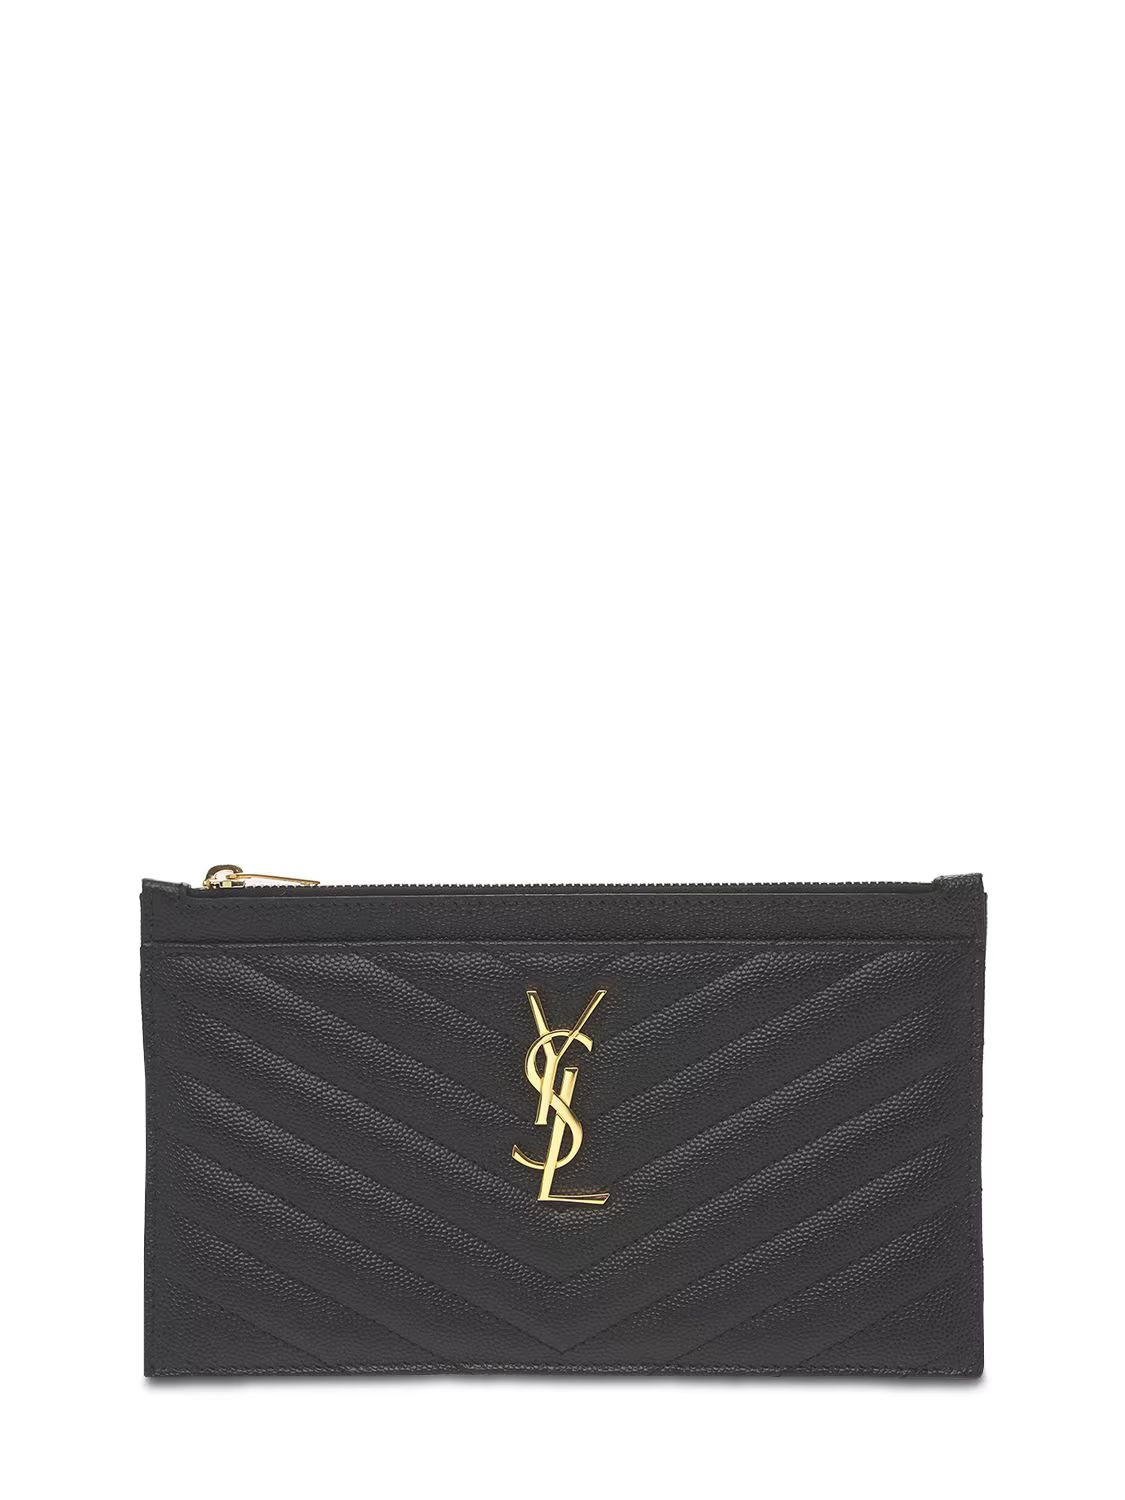 SAINT LAURENTSMALL QUILTED LEATHER CLUTCH | Luisaviaroma